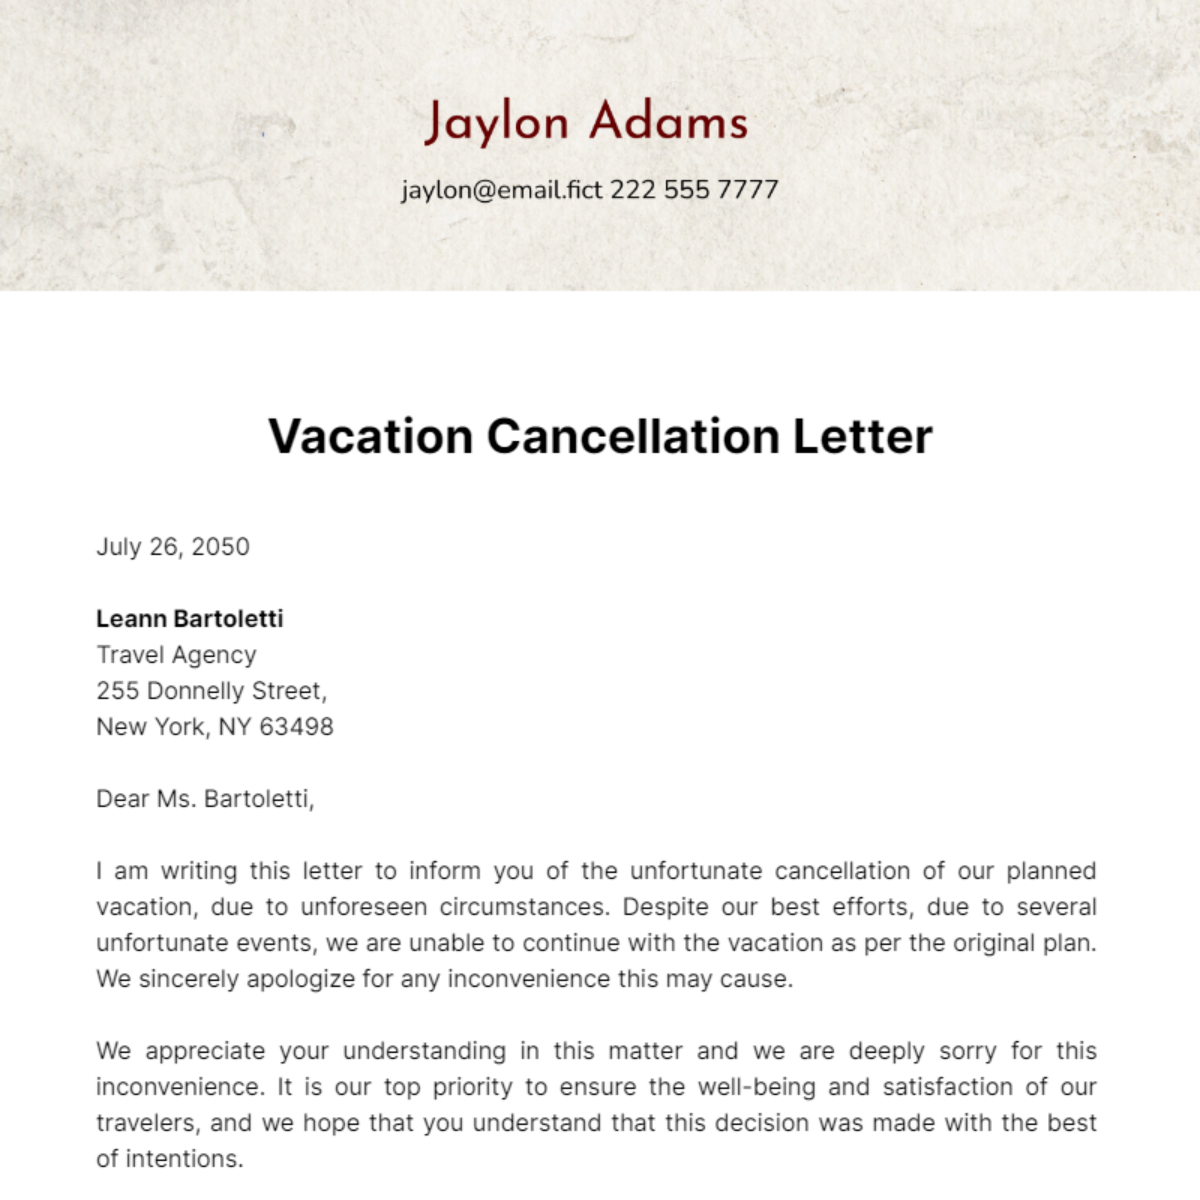 Vacation Cancellation Letter Template